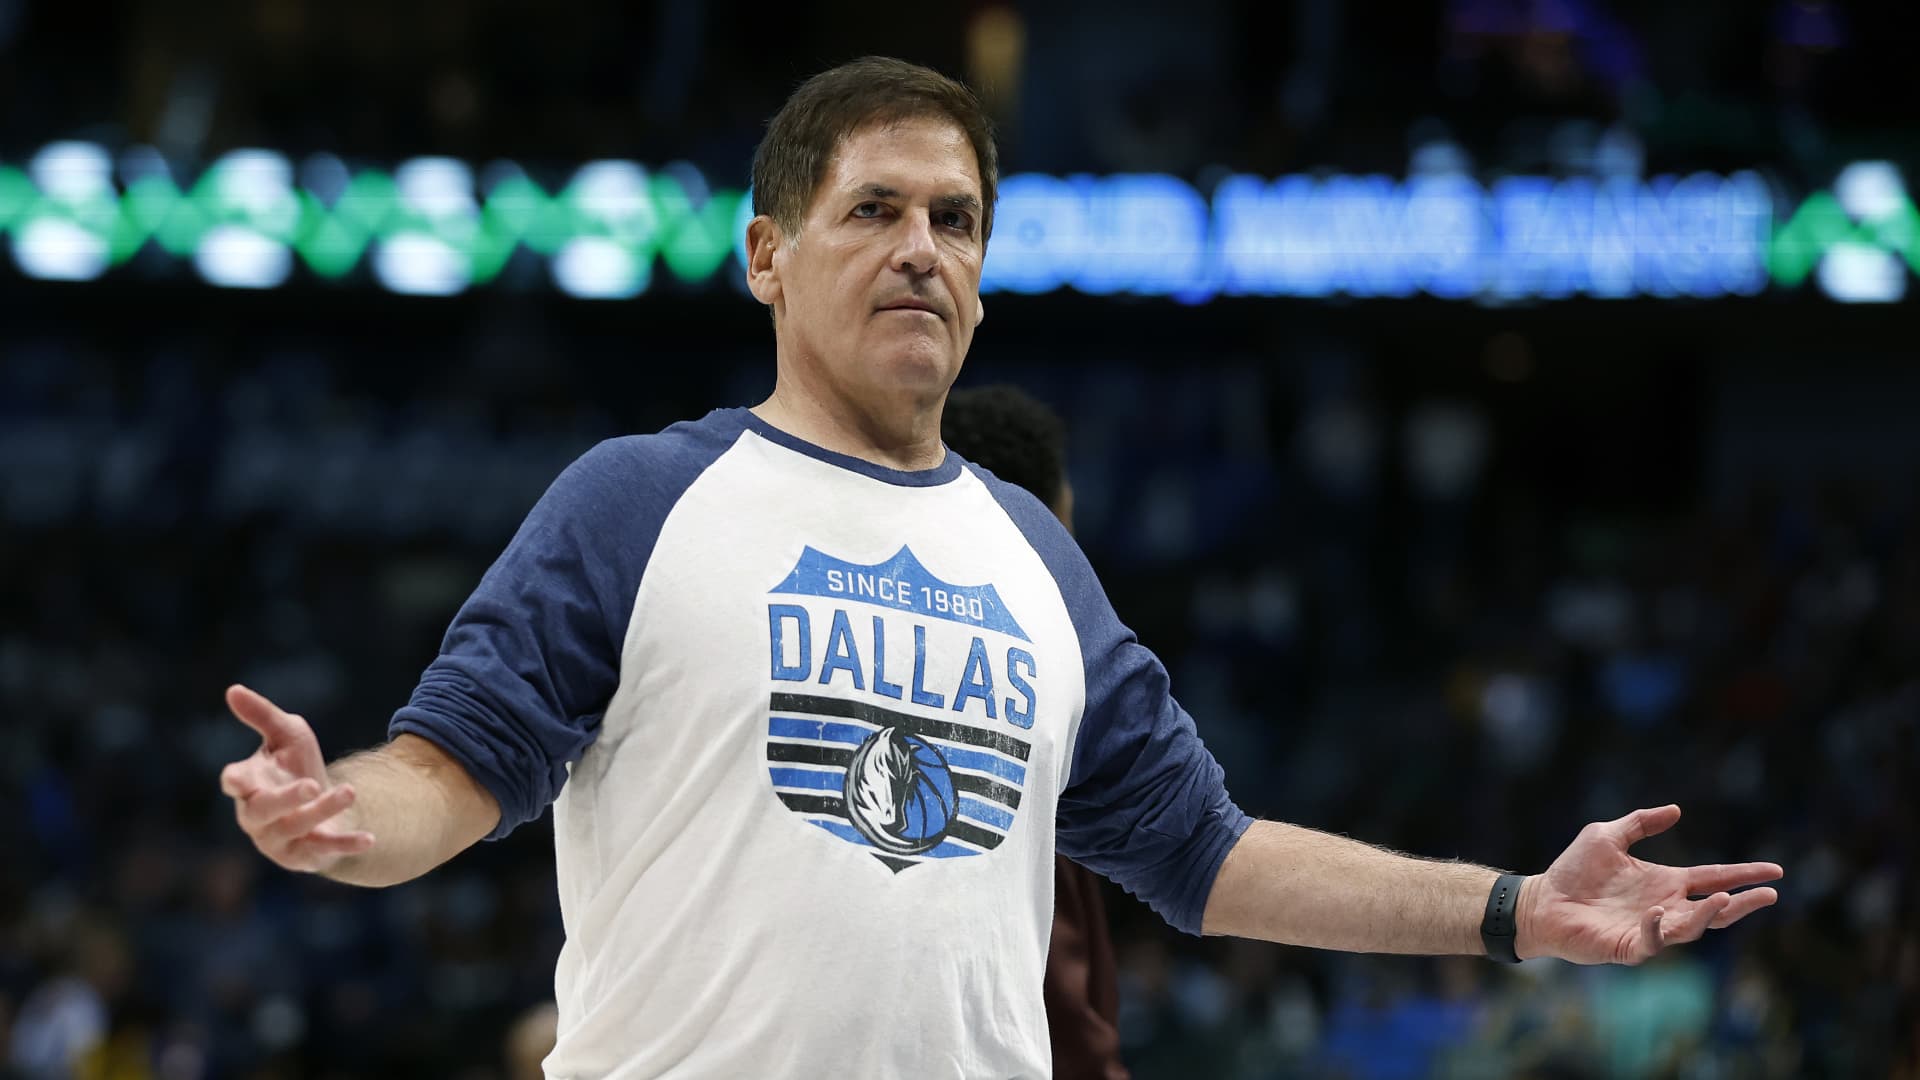 Mark Cuban says 'no plans' to run for president in 2024 on heels of Dallas Mavericks deal